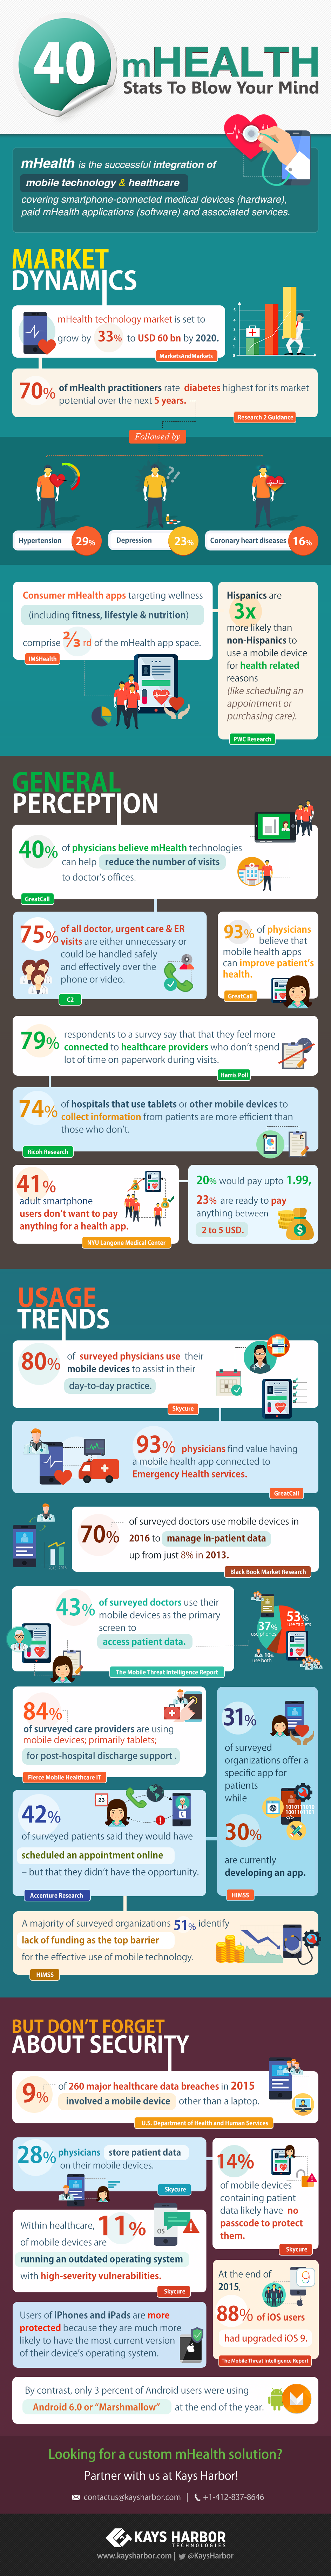 40 mHealth Statistics To Blow Your Mind